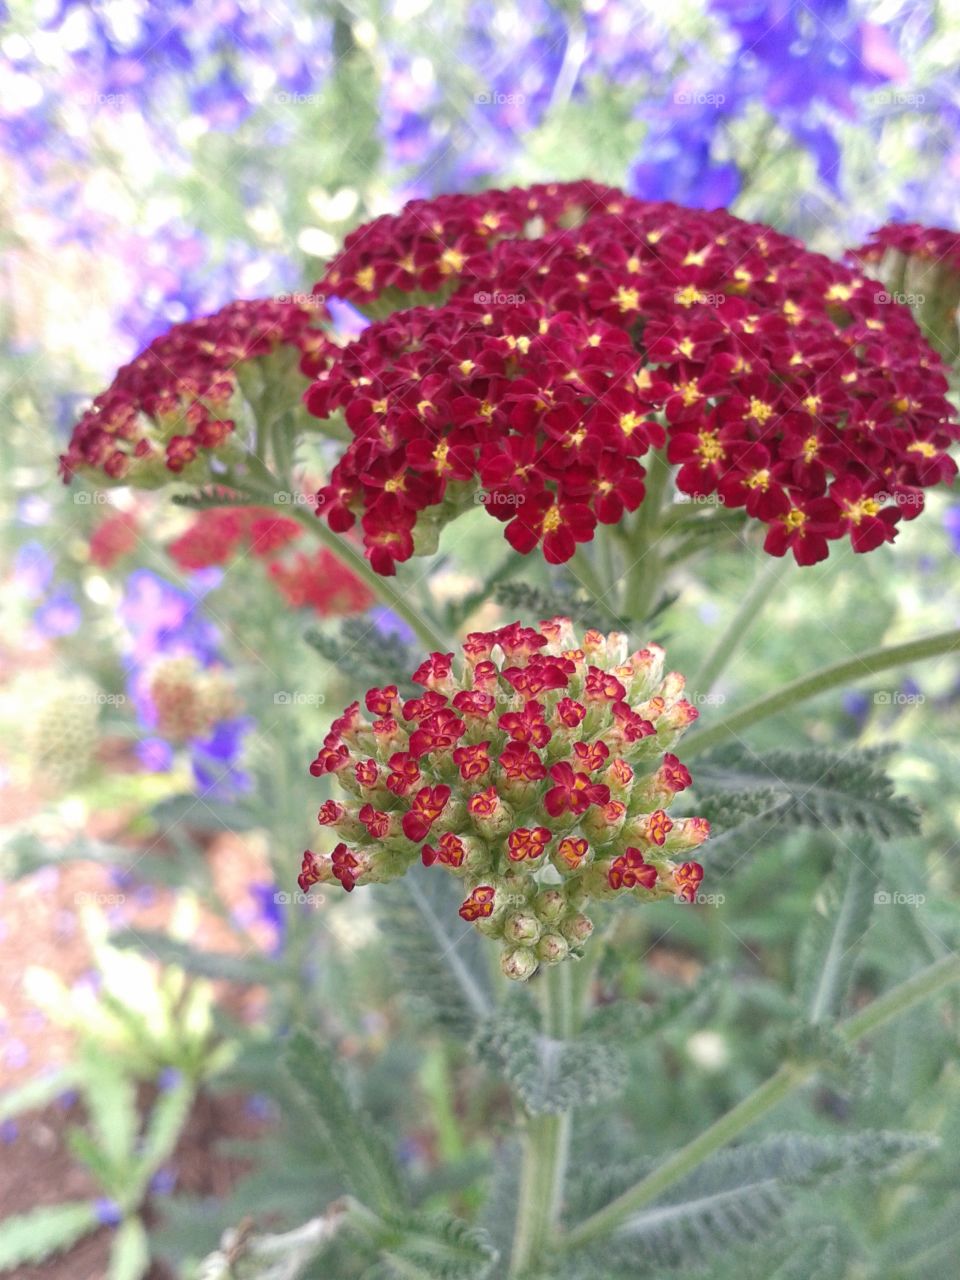 Yarrow in brick red. Finally the first blooms from my Yarrow. 